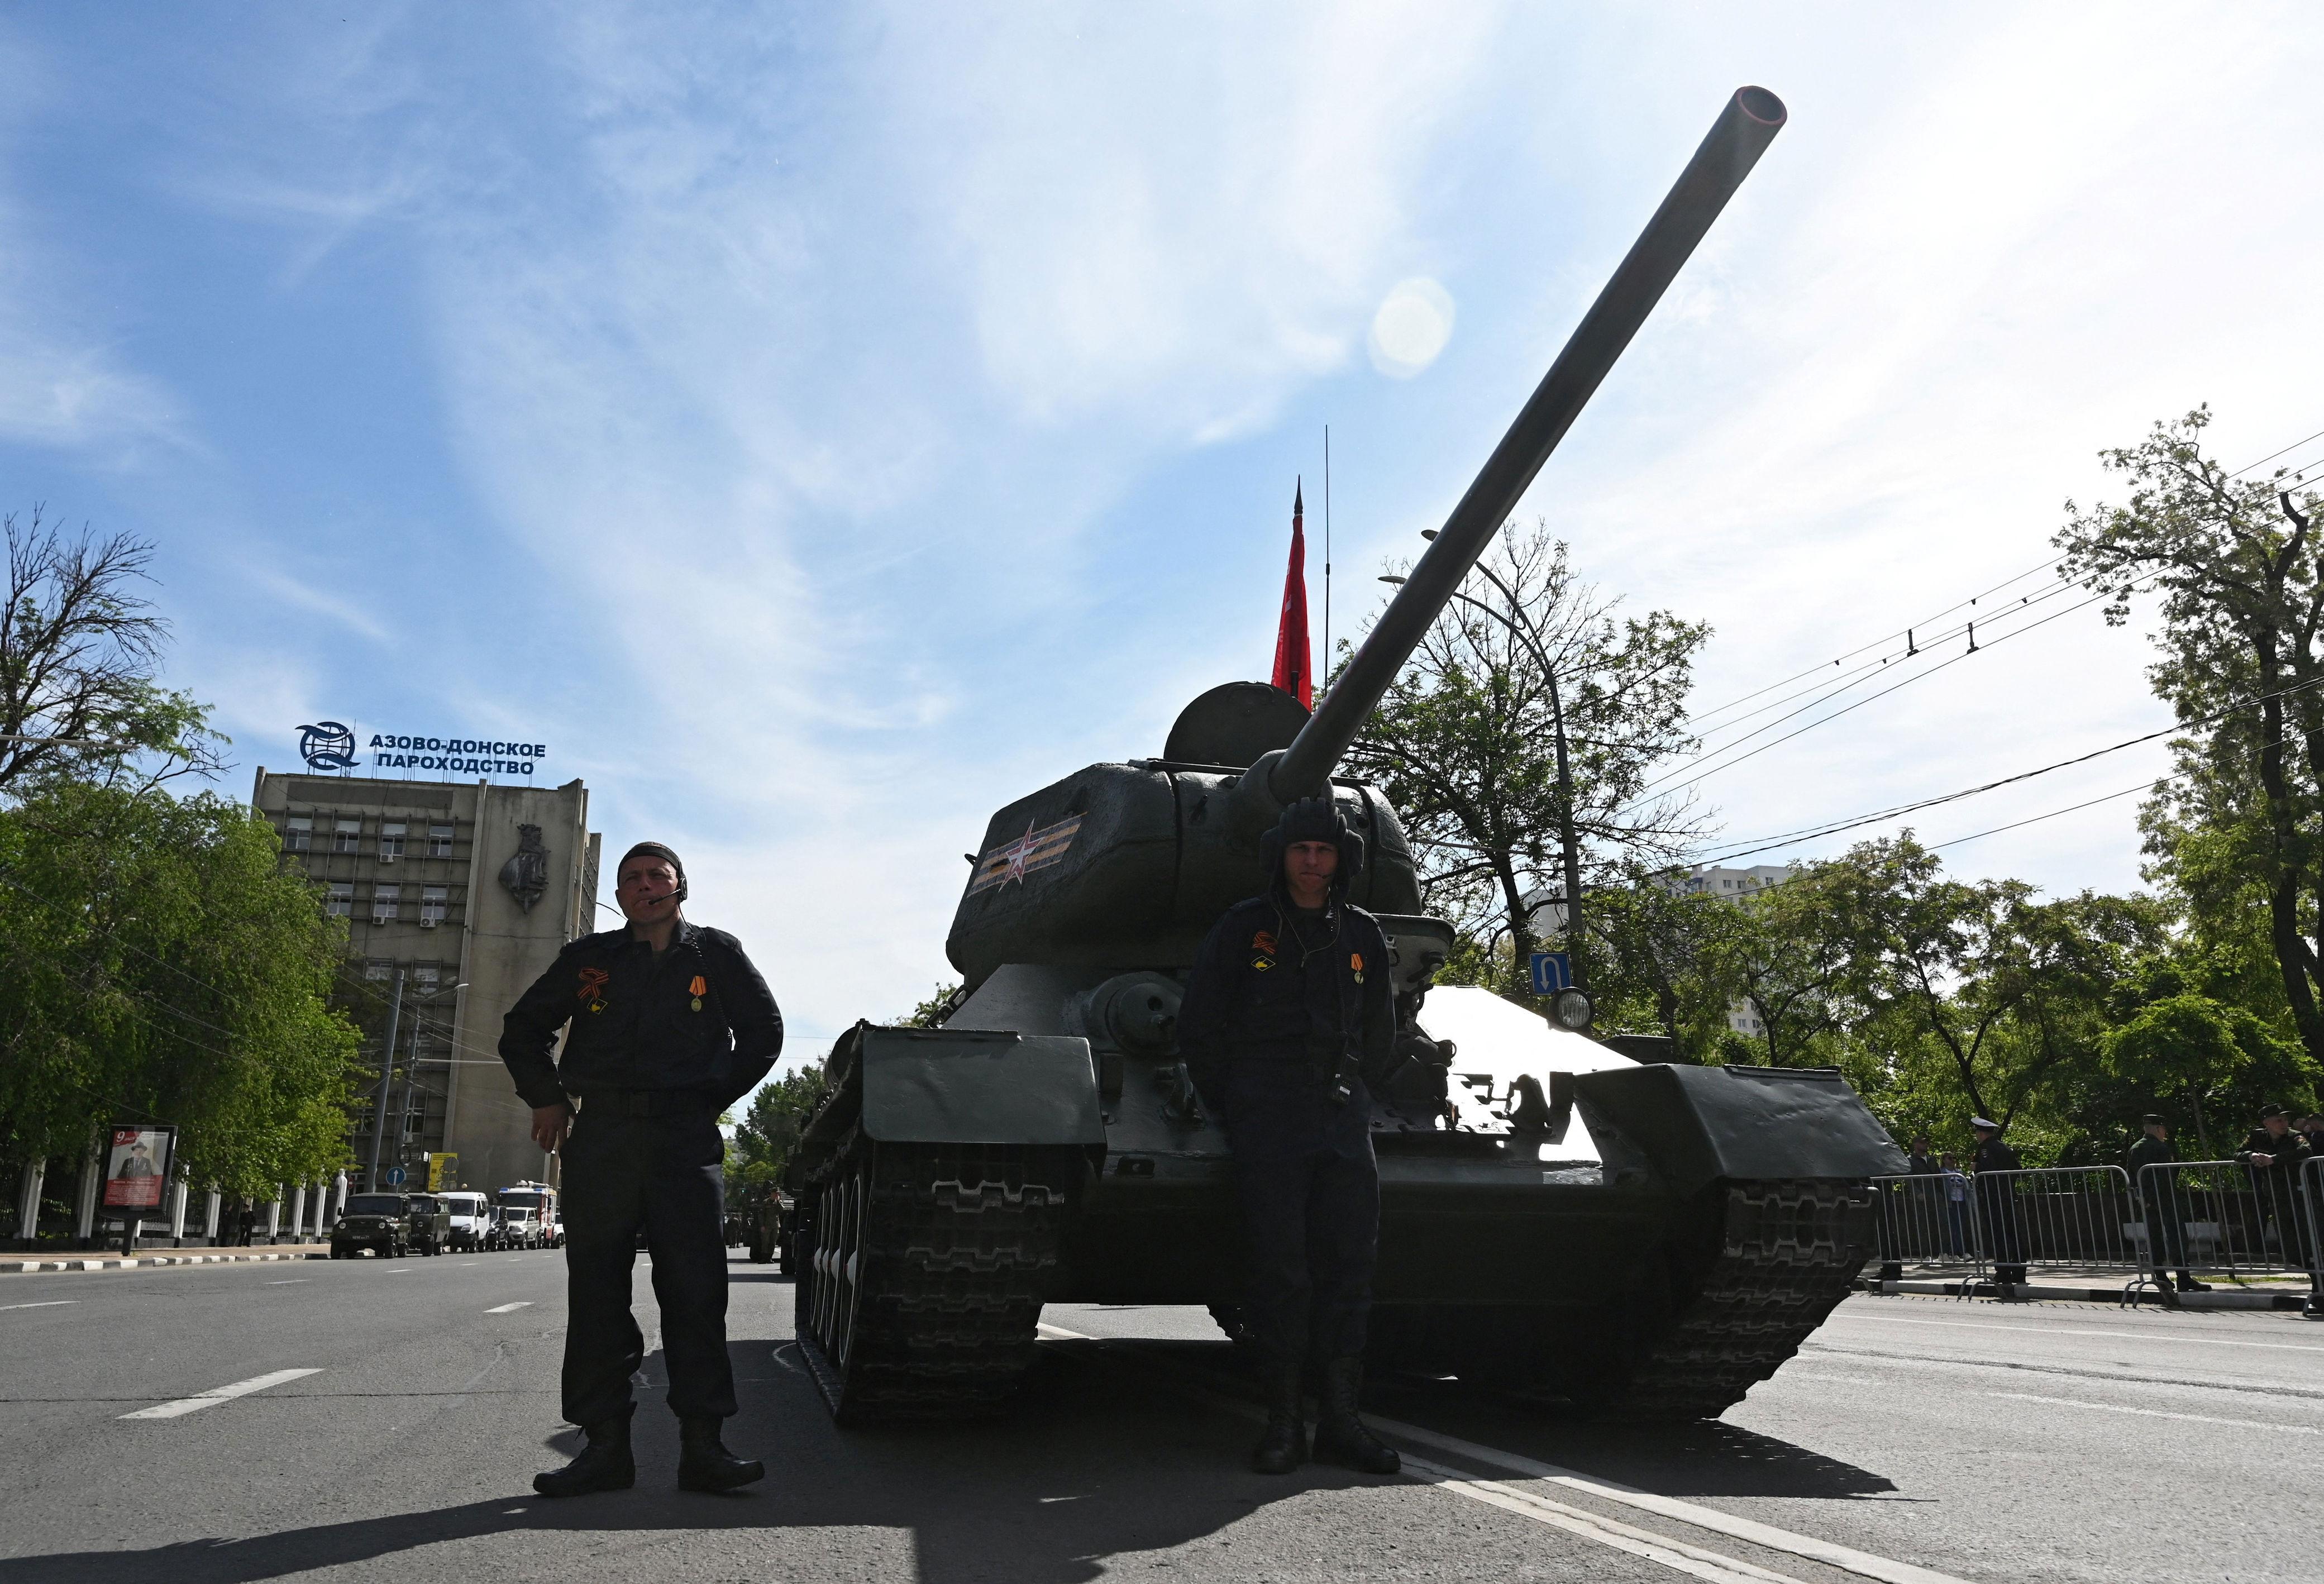 only one tank on display in russian victory parade - and its from ww2- as putin concedes 'difficult period'